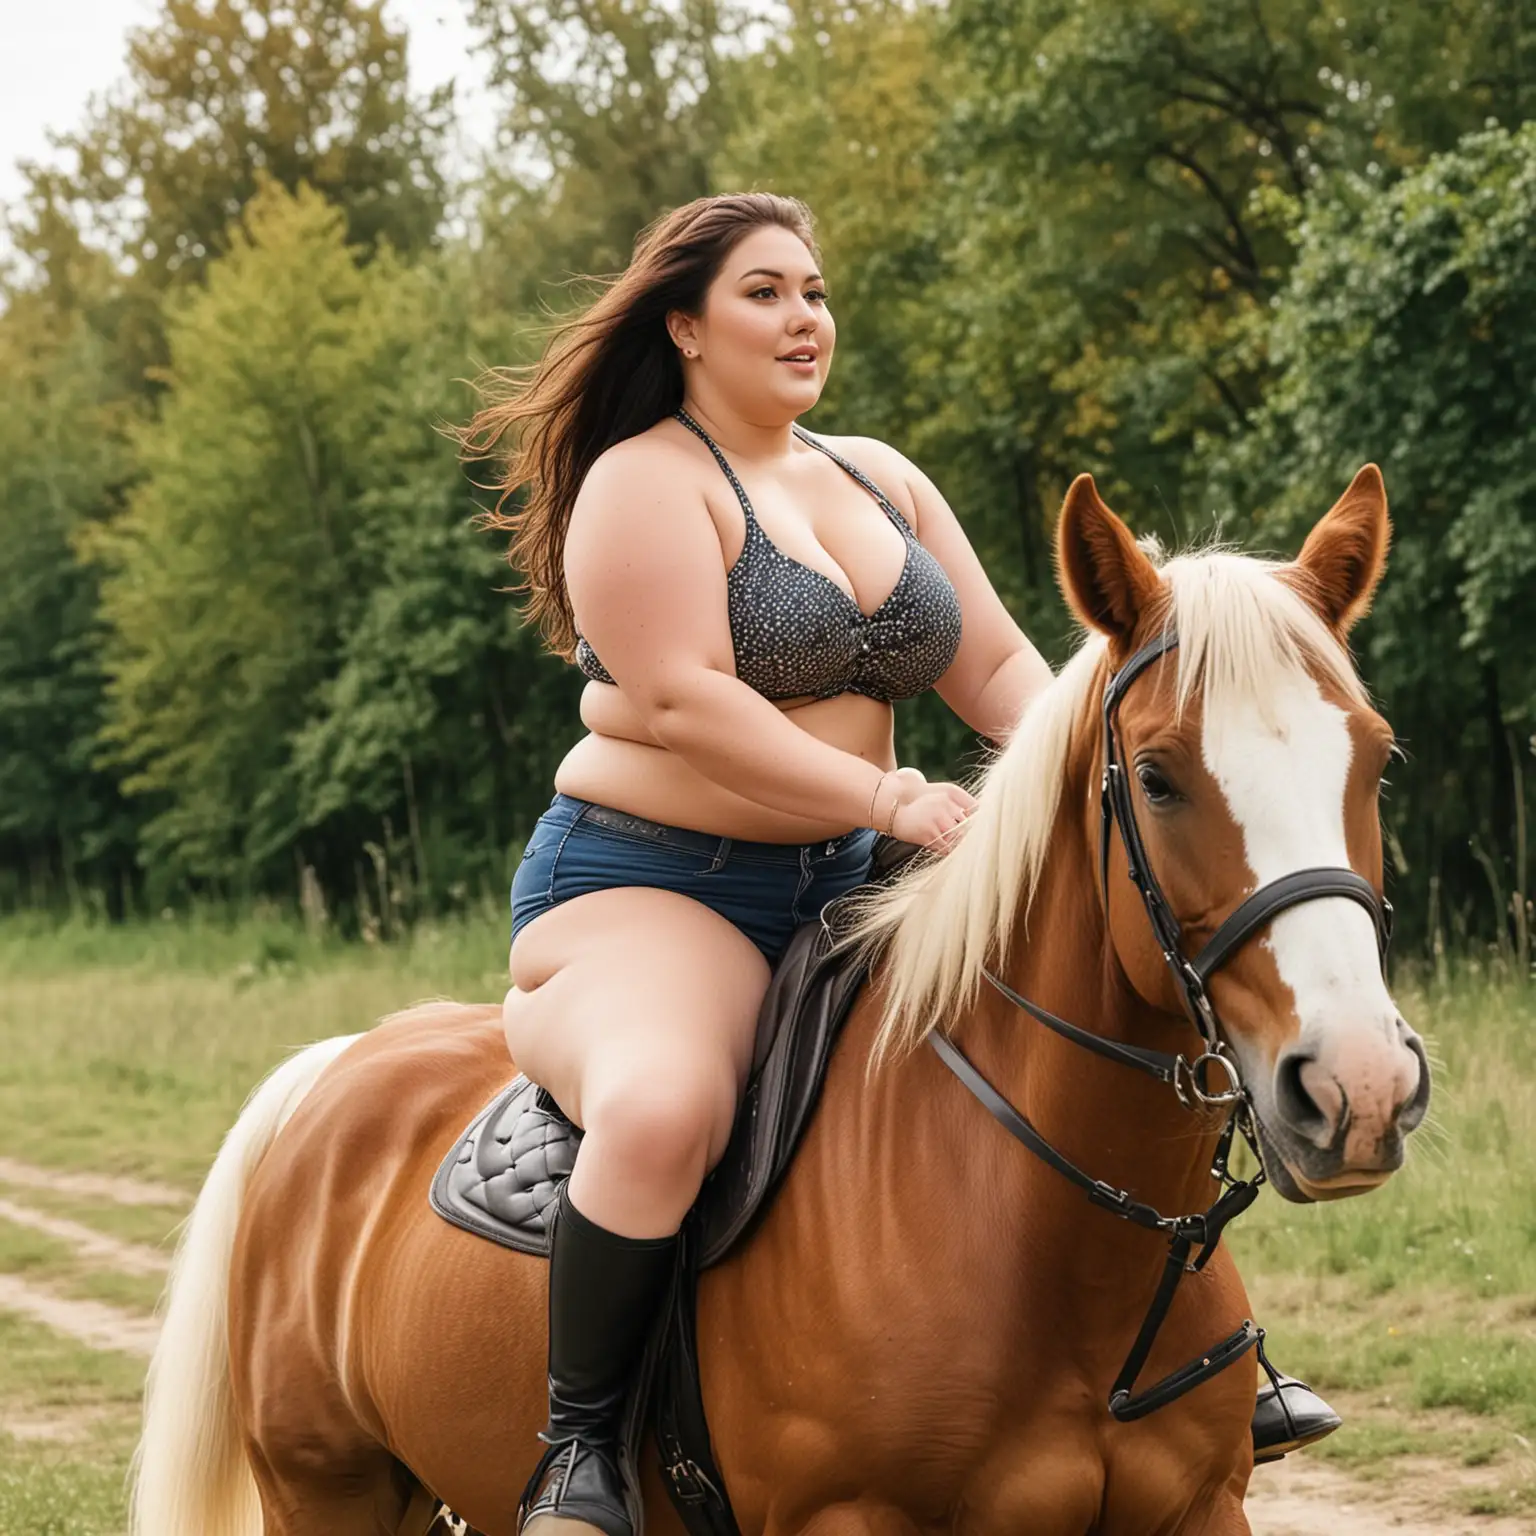 A sexy beautiful fat chubby woman riding a horse